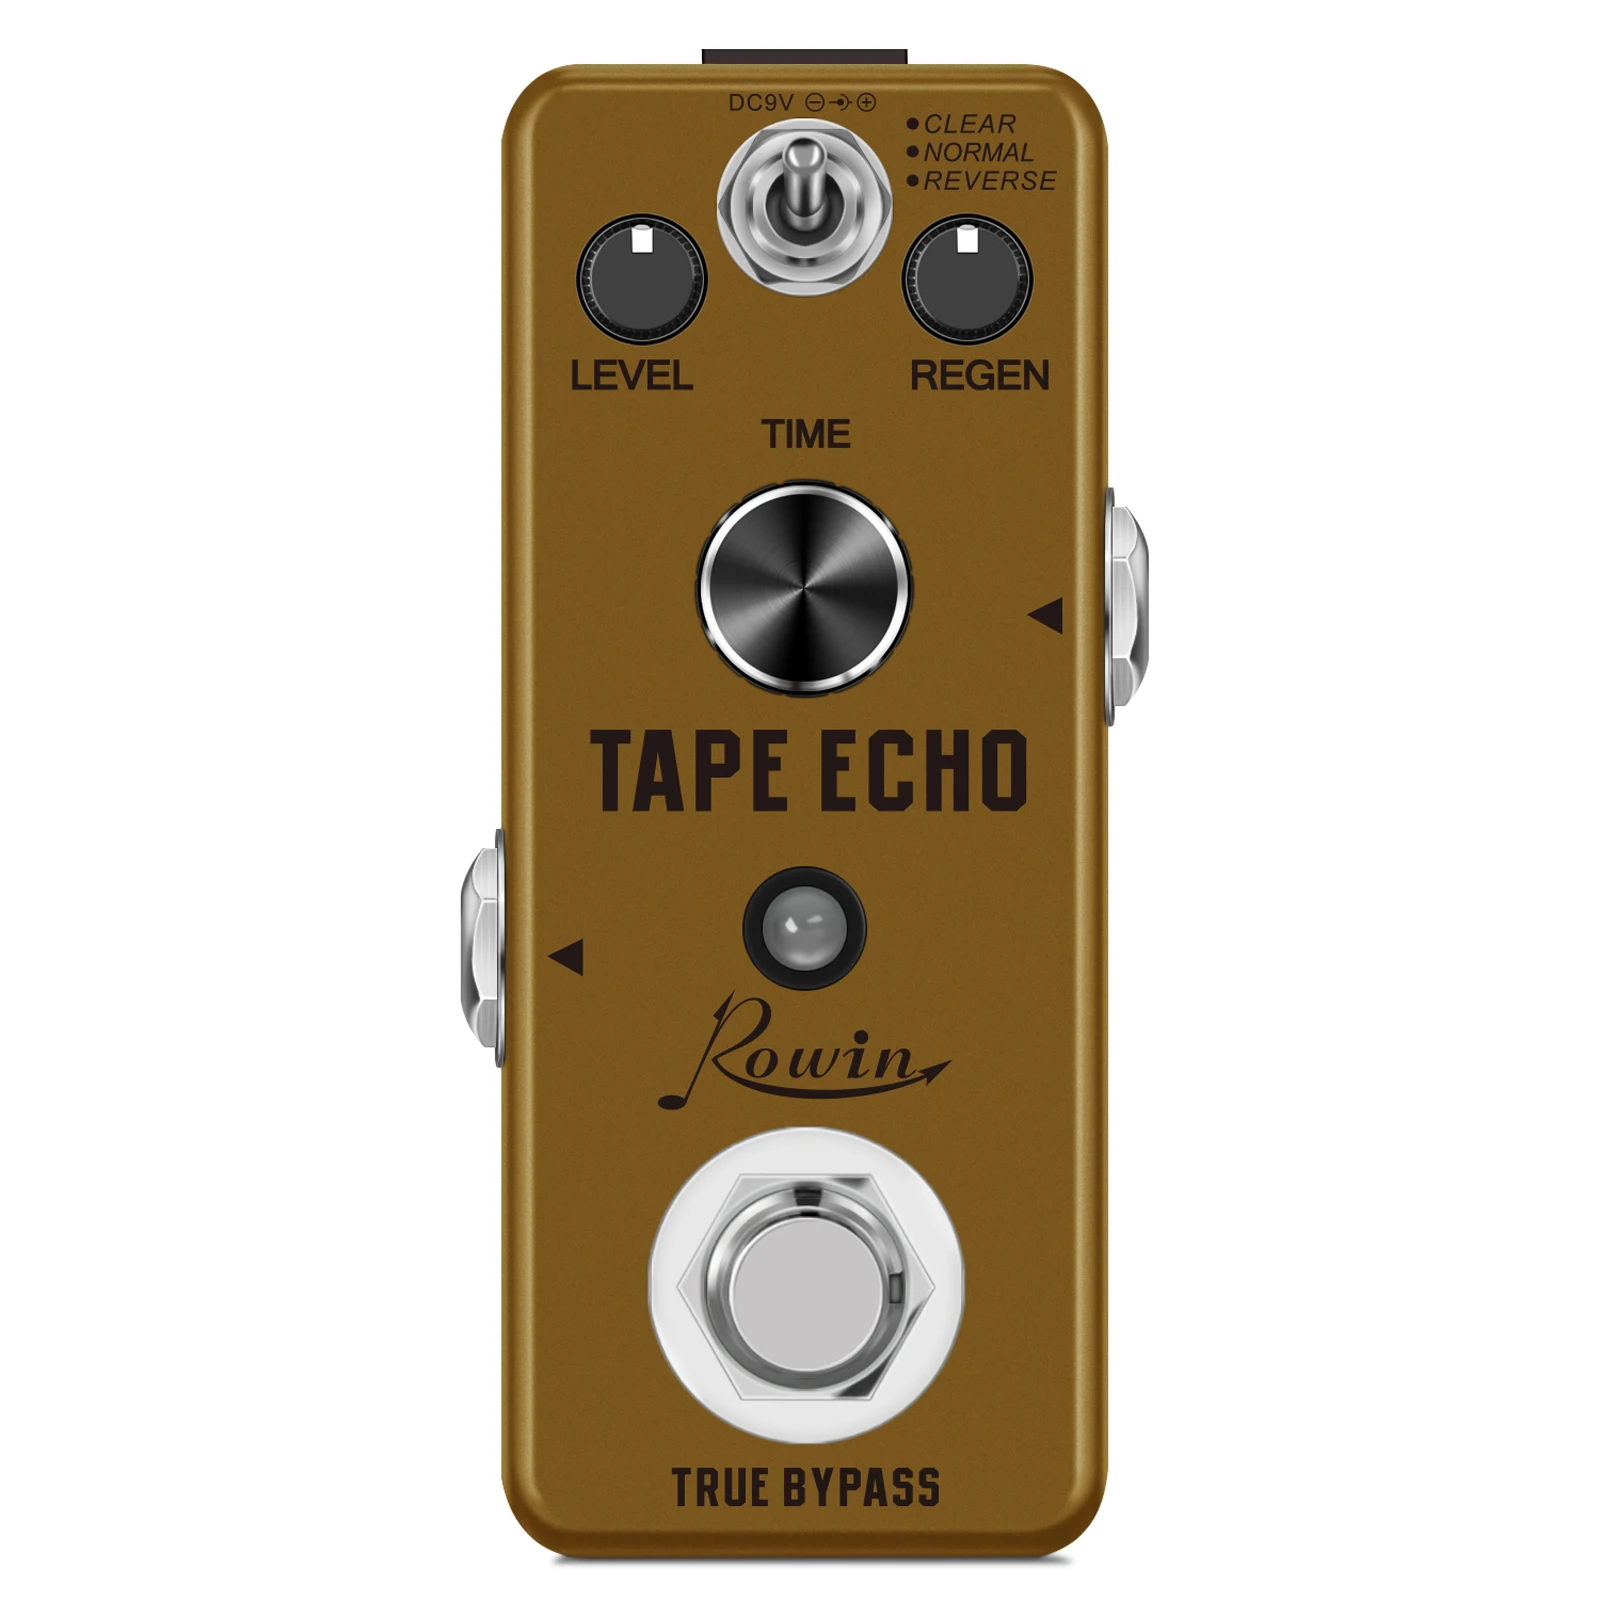 Rowin LEF-3809 Digital Tape Echo Pedal Clear&Normal&Reverse 3 Models With Unique and High Quality Sound True Bypass enlarge